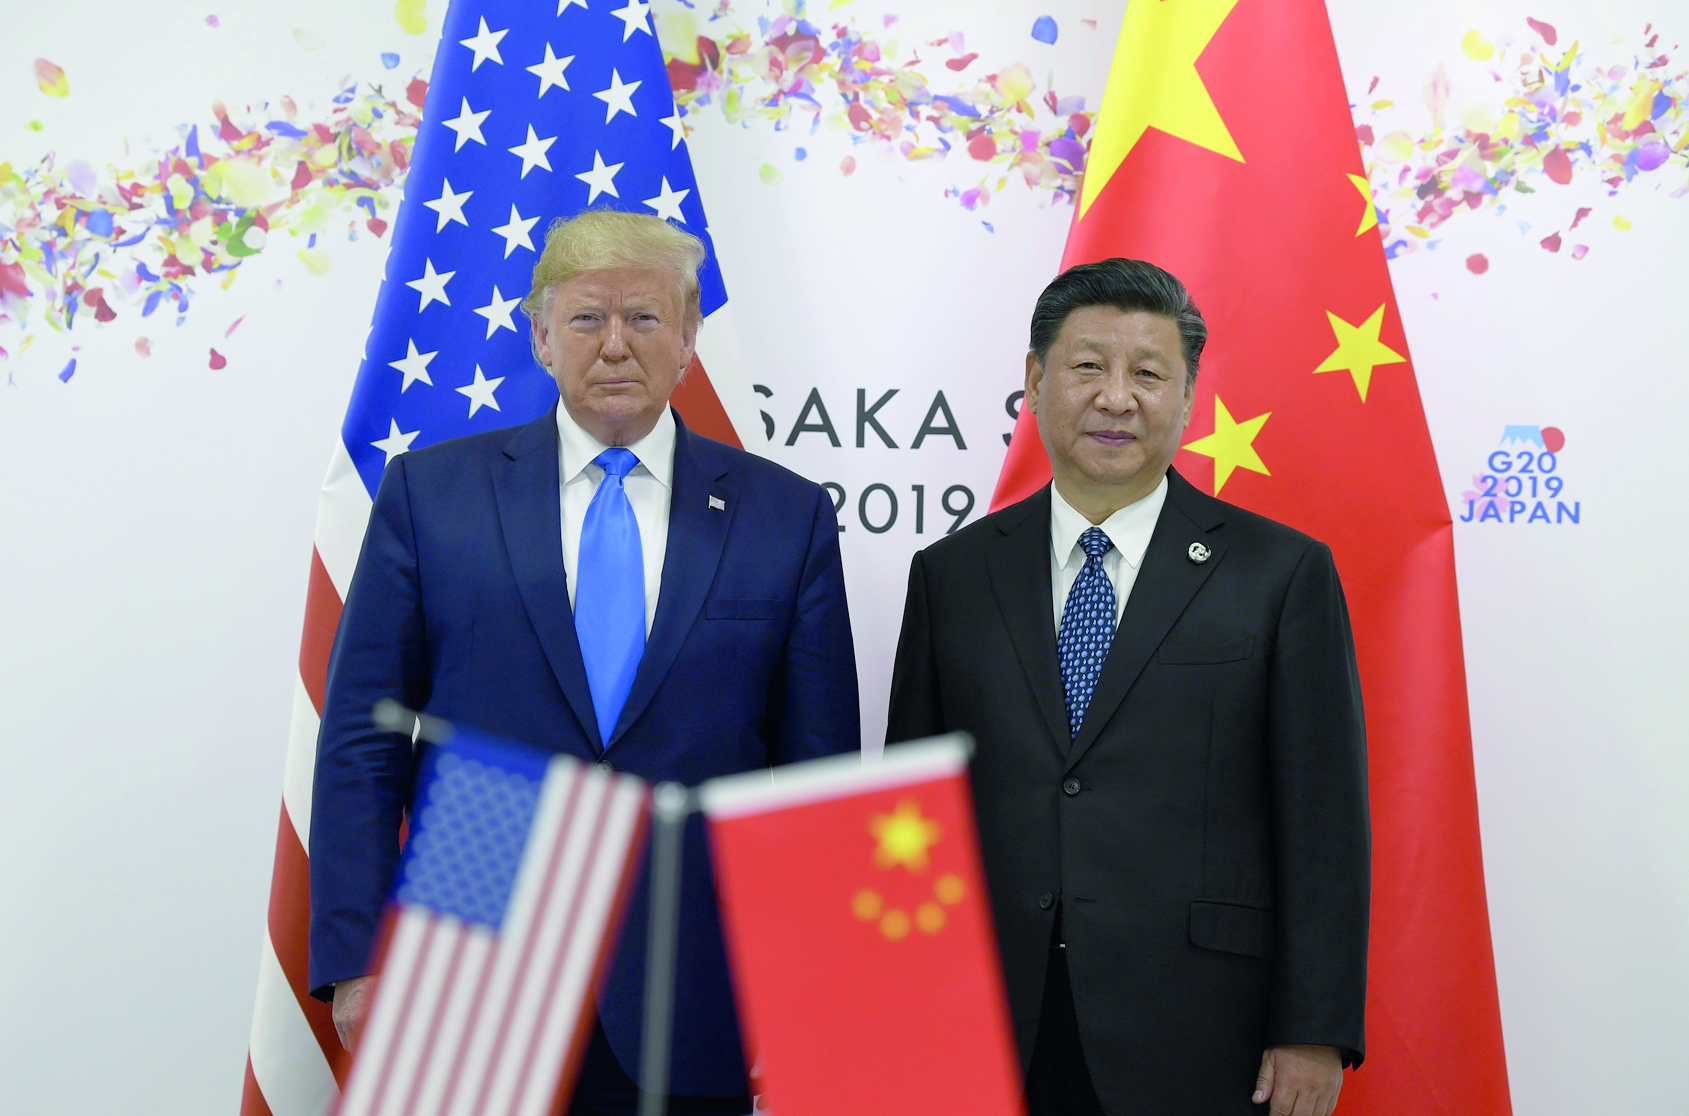 FILE - In this June 29, 2019, file photo President Donald Trump, left, poses for a photo with Chinese President Xi Jinping during a meeting on the sidelines of the G-20 summit in Osaka, Japan. China has fast become a top election issue as President Donald Trump and Democrat Joe Biden engage in a verbal brawl over who's better at playing the tough guy against Beijing. (AP Photo/Susan Walsh, File) Donald Trump,Xi Jinping ArcInfo